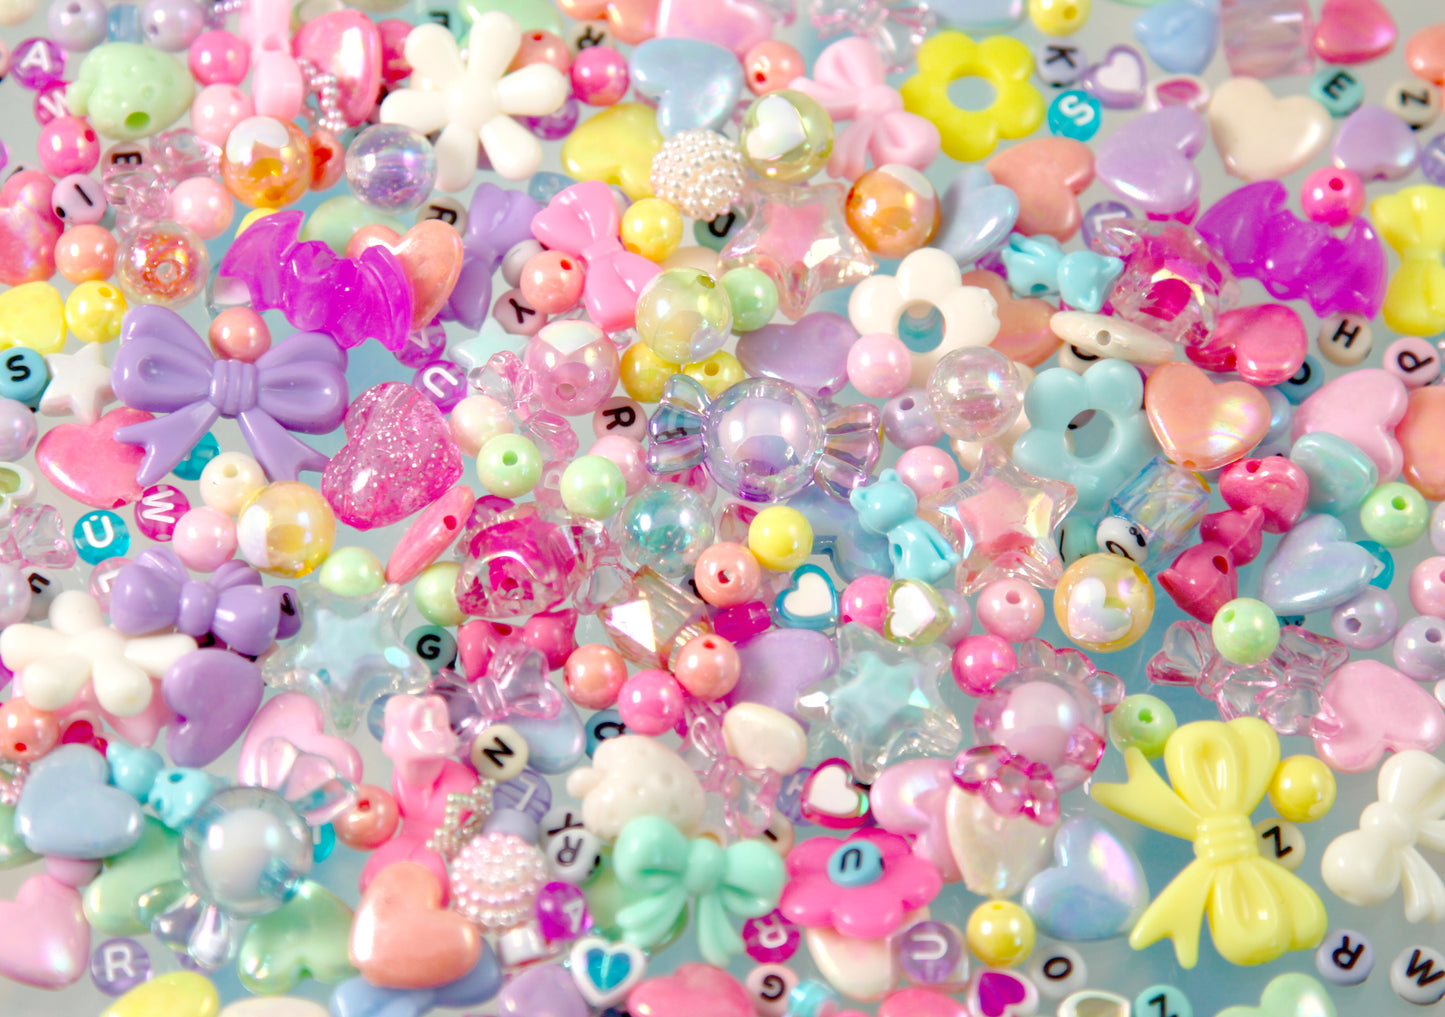 Acrylic Bead Grab Bag - Pastel Colors - Mixed Lot of Plastic Beads - great for kandi, ispy, sensory crafts, jewelry making - Over 200 pcs